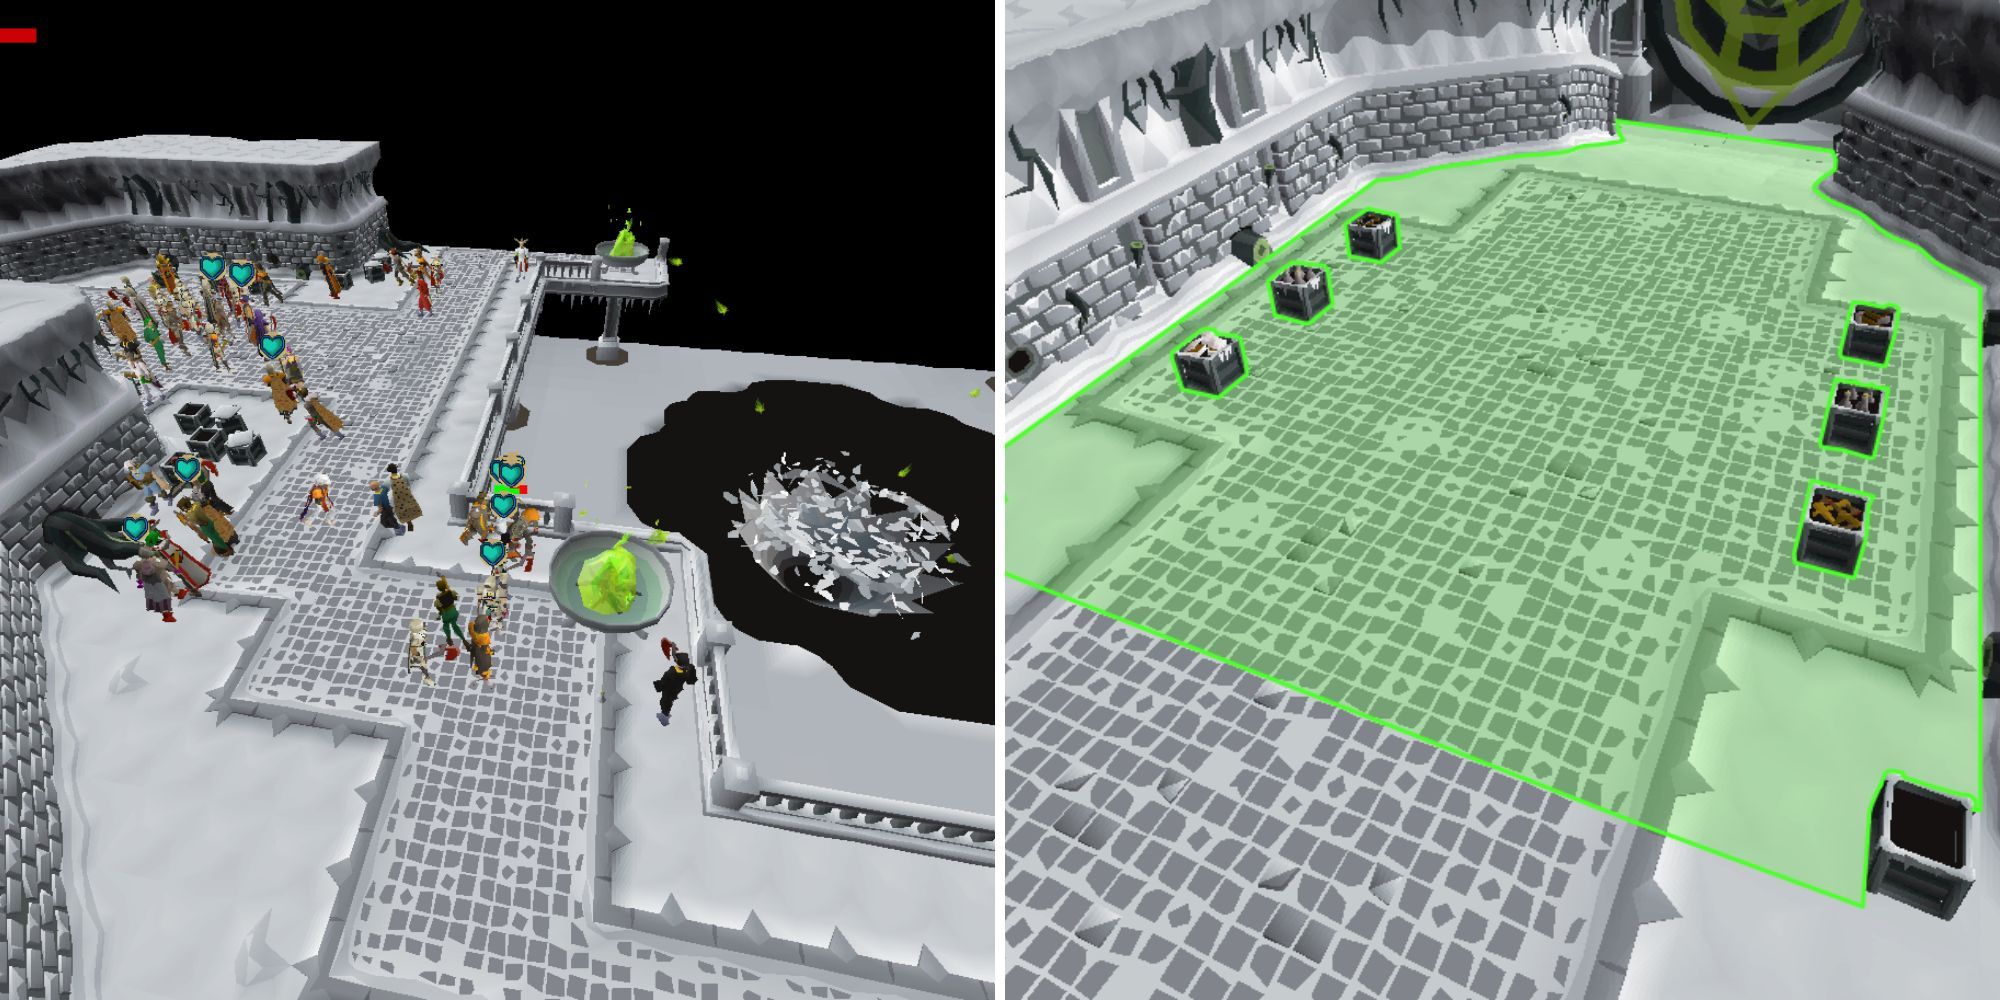 A split image showing dozens of players in the Wintertodt area, and an empty safe zone in Wintertodt.